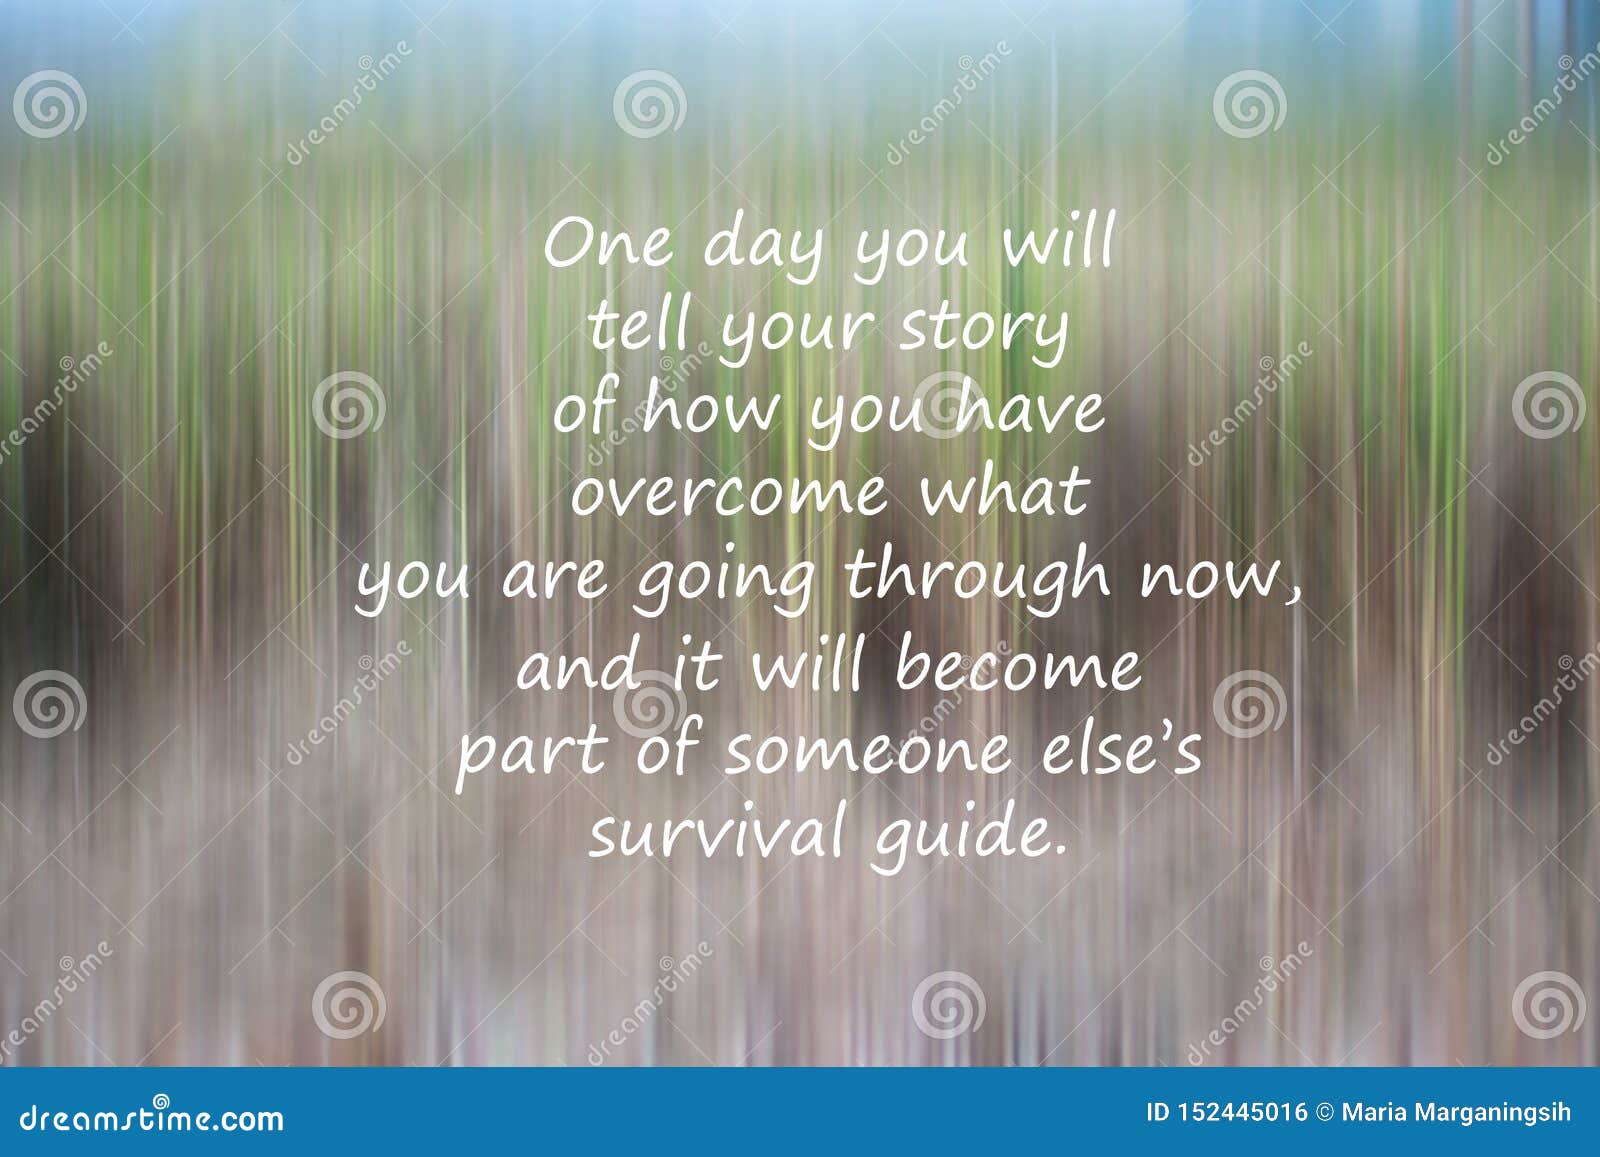 Inspirational Motivational Survival Quote One Day You Will Tell Your Story Of How You Have Overcome What You Are Going Through Stock Photo Image Of Monday Background